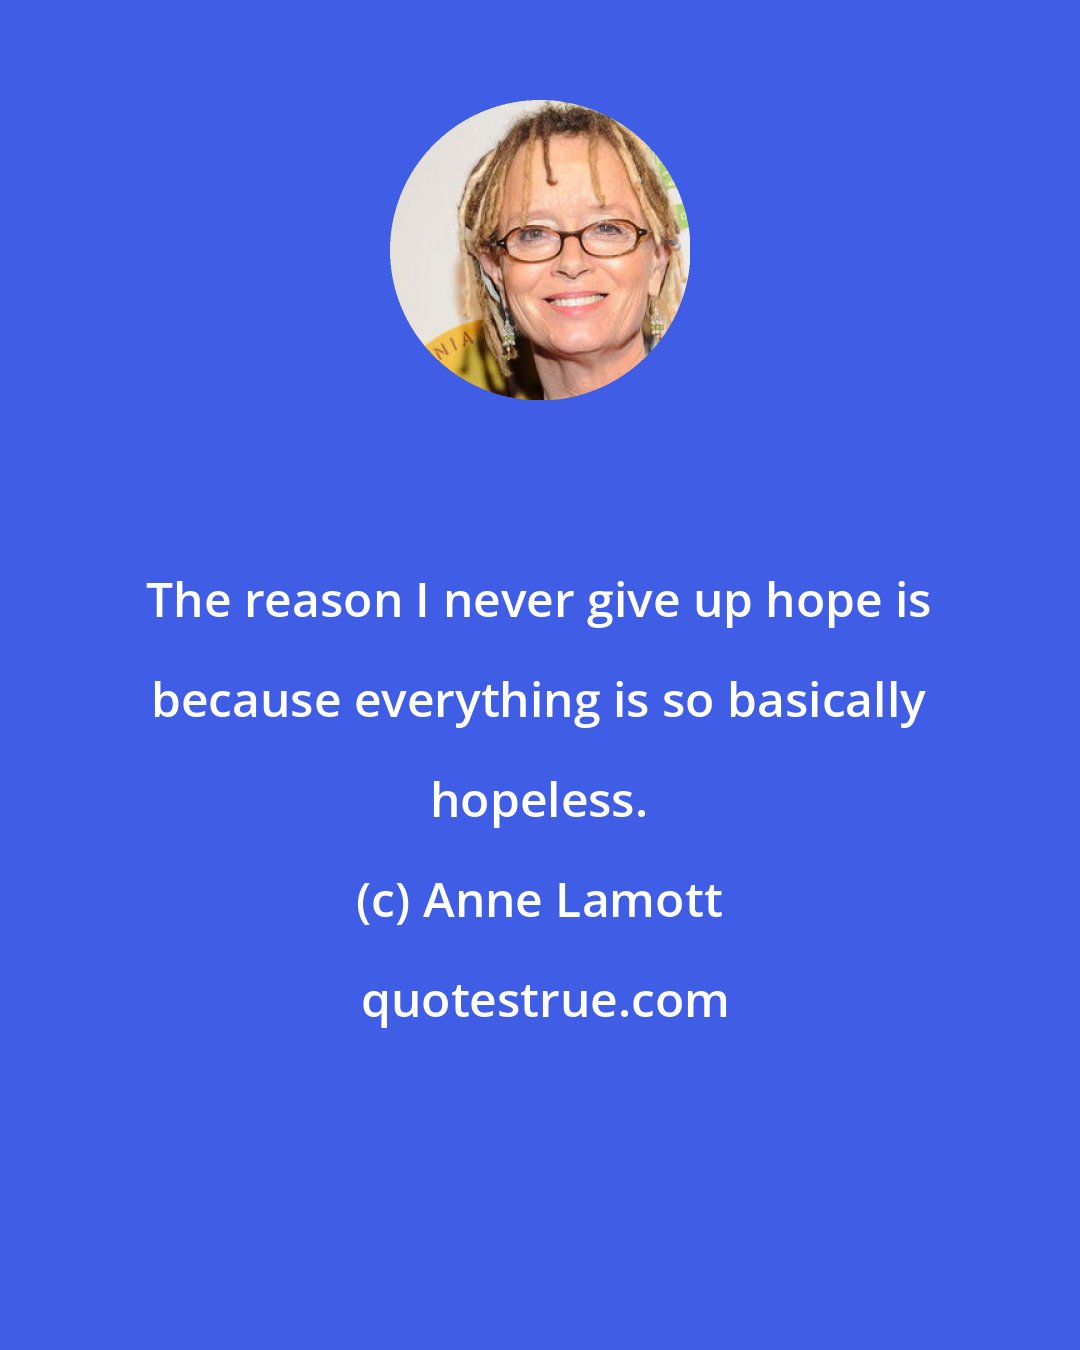 Anne Lamott: The reason I never give up hope is because everything is so basically hopeless.